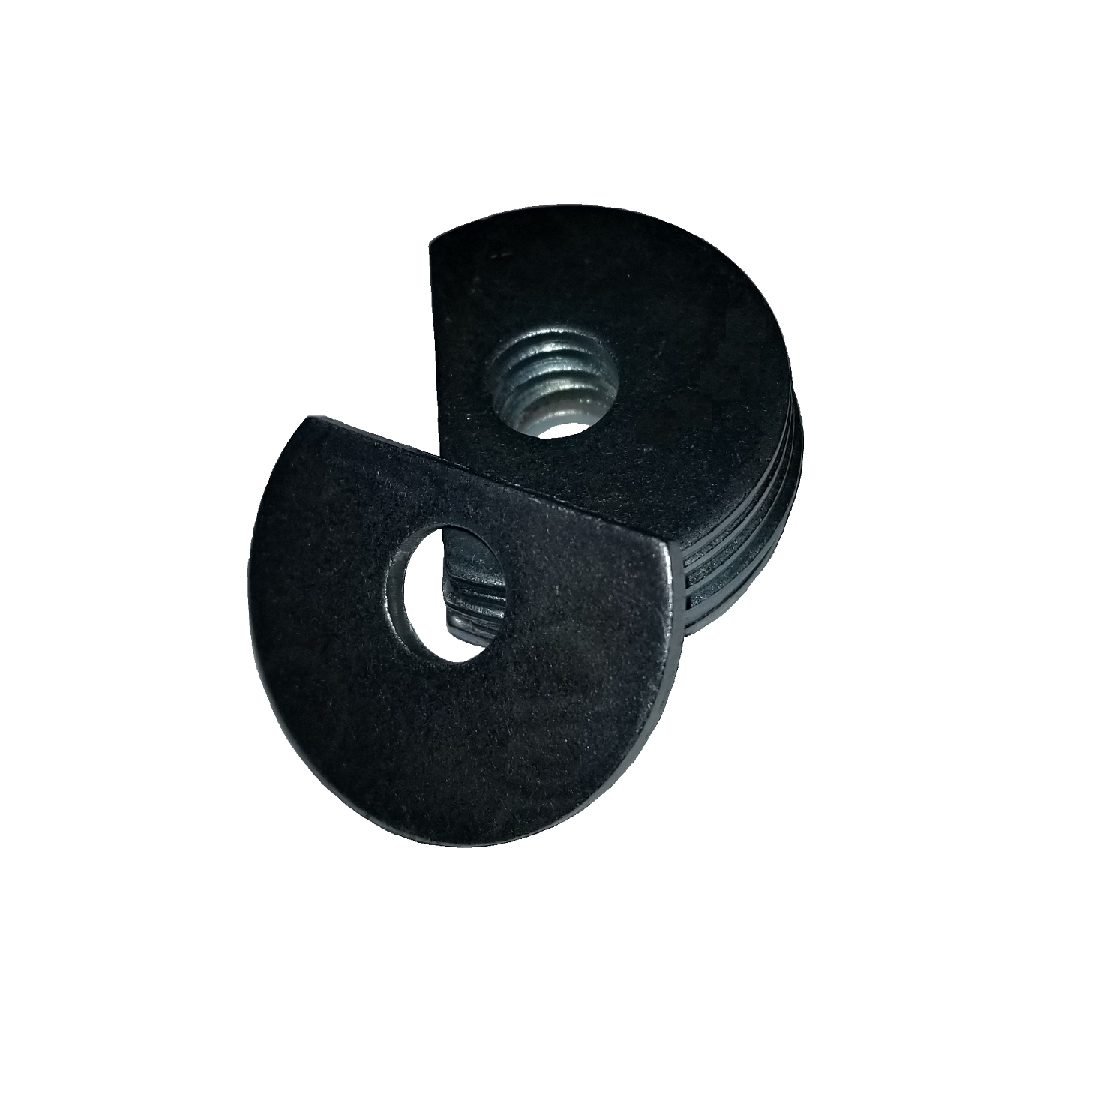 Clipped OD Washer - 1.093 ID, 1.969 OD, 0.134 Thick, Low Carbon Steel - Soft, Zinc & Yellow